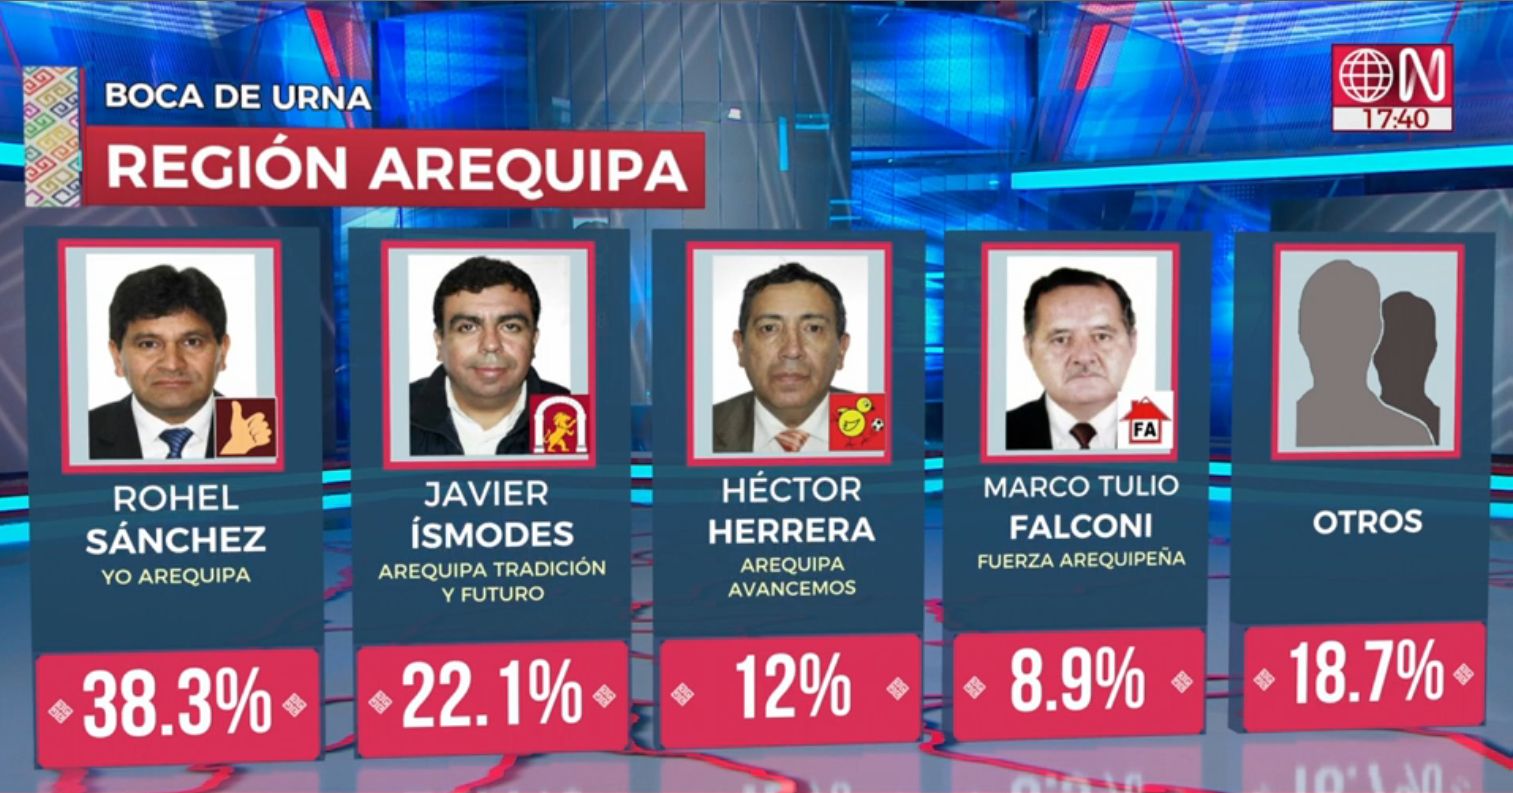 Results At Exit From Arequipa Area